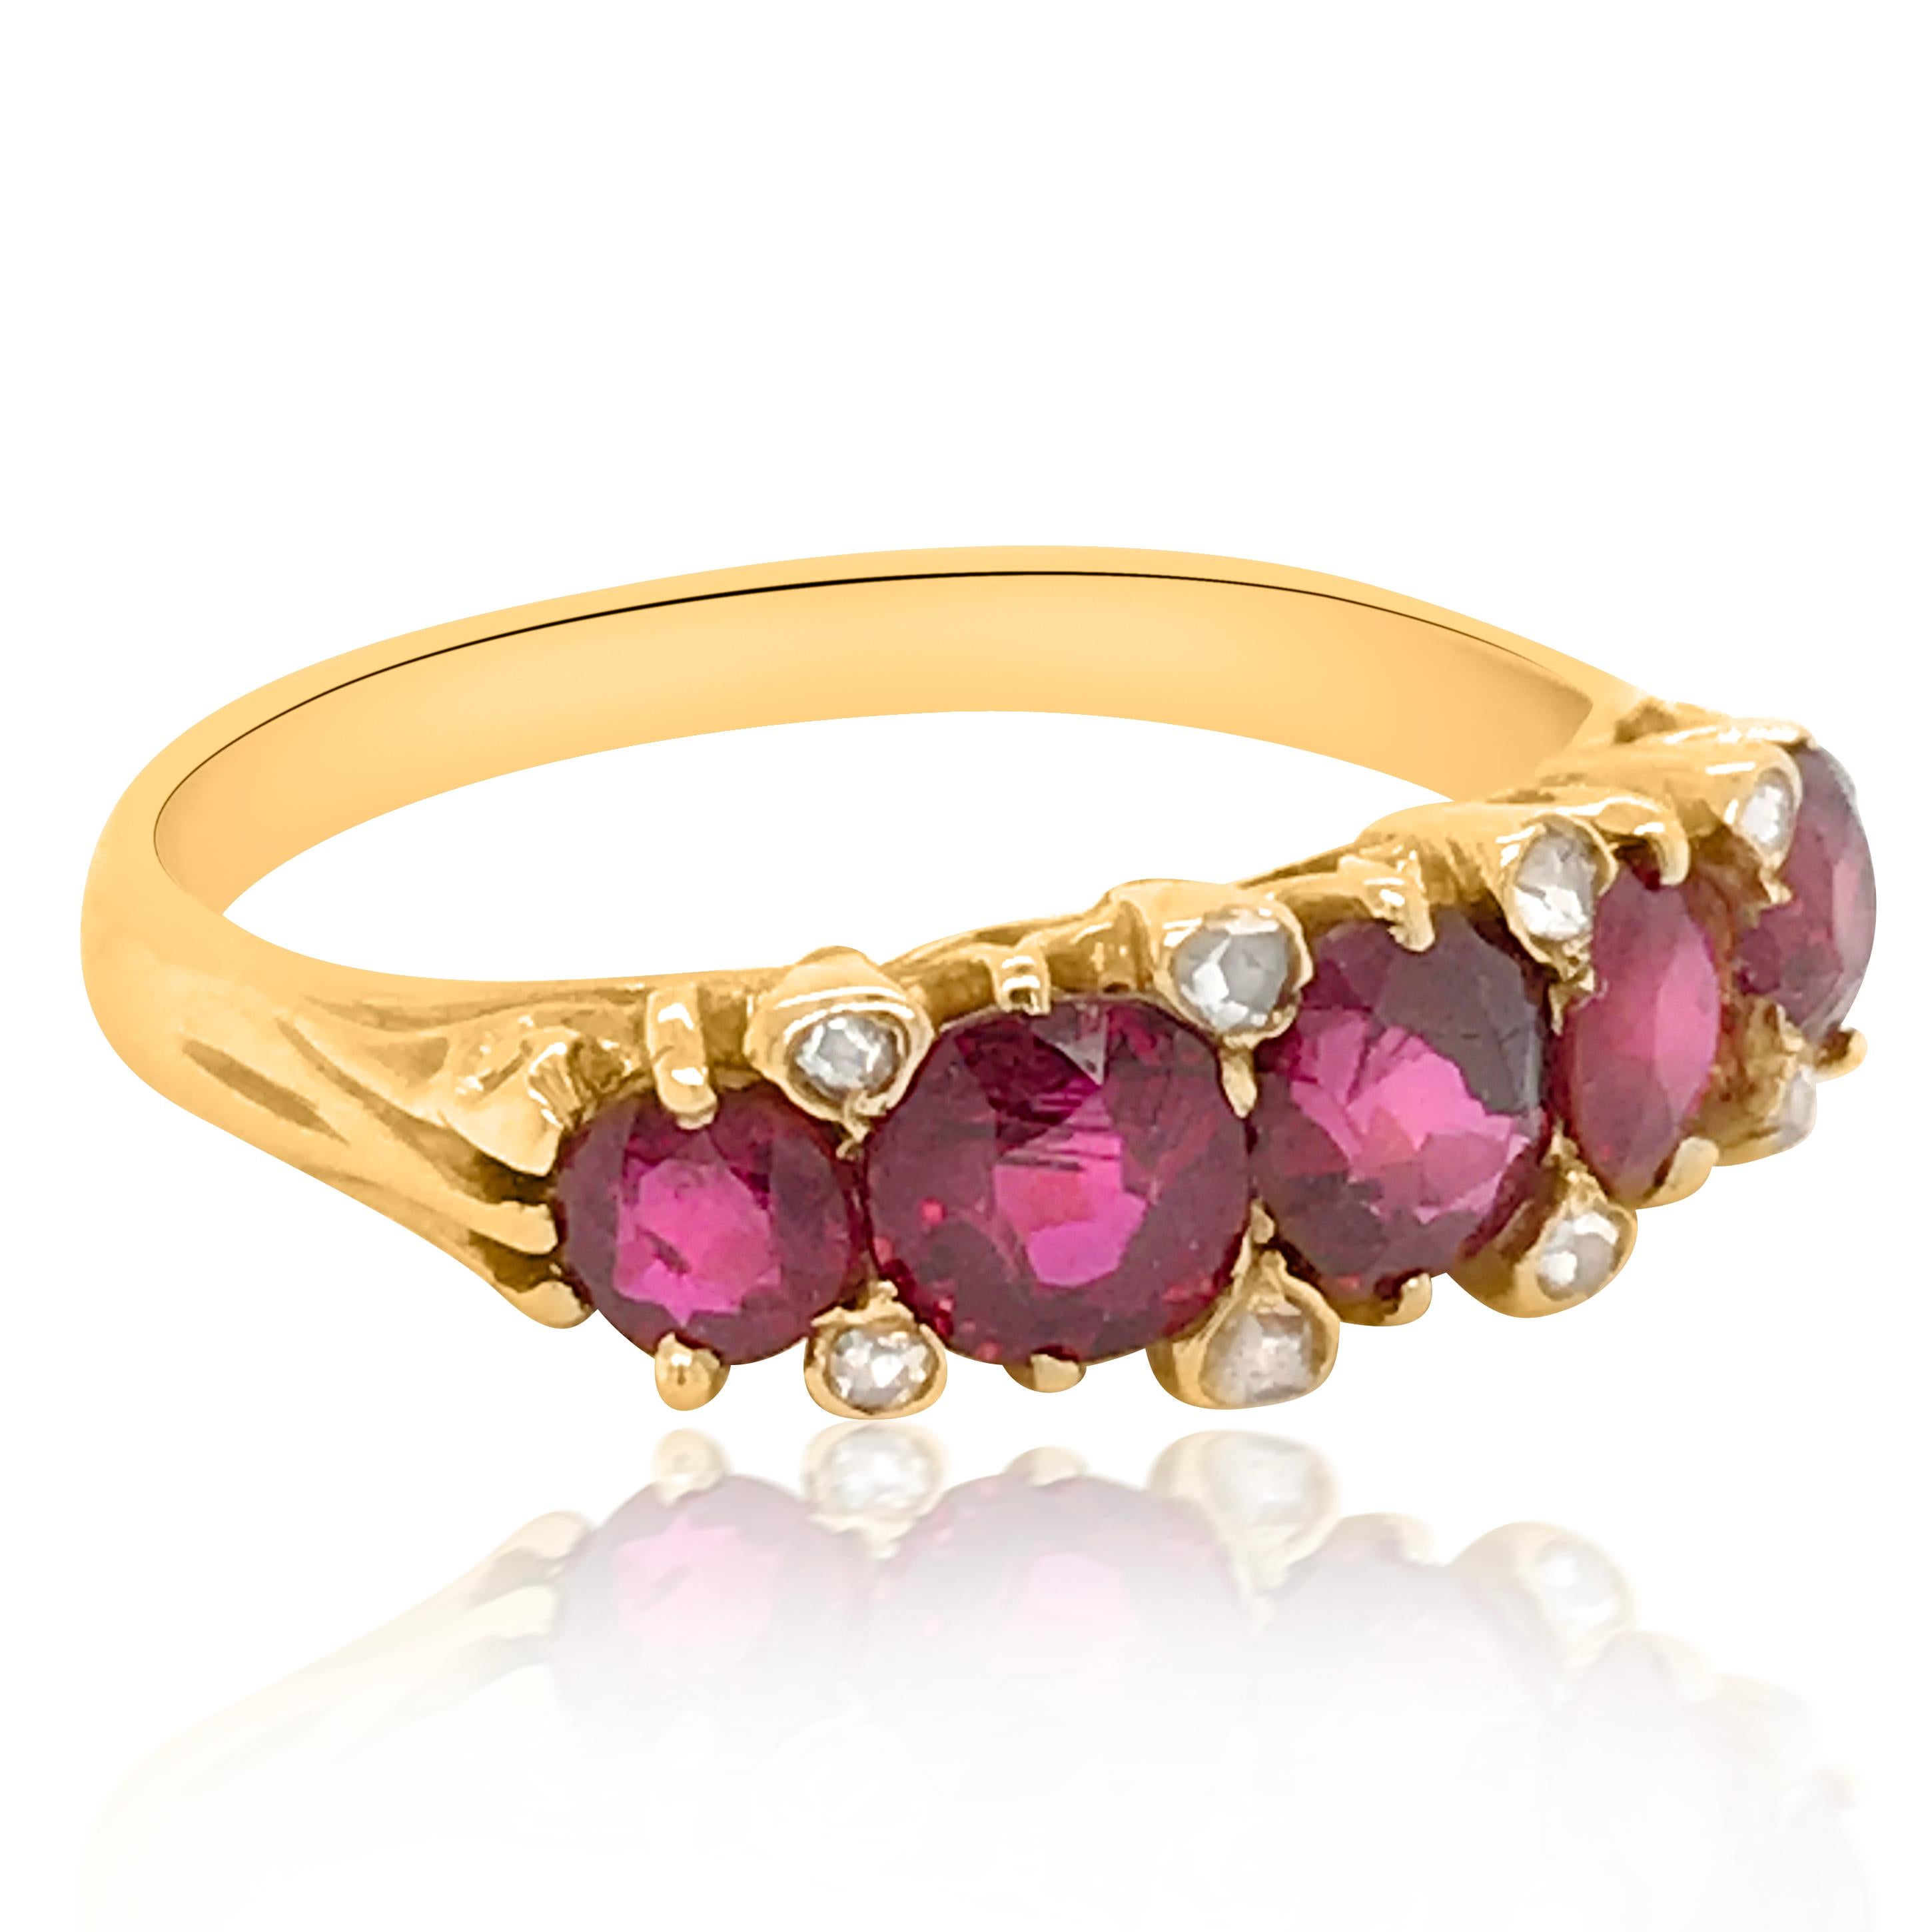 This antique shimmering ruby and diamond ring is crafted in 18K yellow gold, weighing 4.68 grams and in ring size 9.5 (adjustable). It is adorned with 5 rubies in a row, weighing cumulatively approx. 2.09 carats. Enhanced with 8 rose-cut diamonds